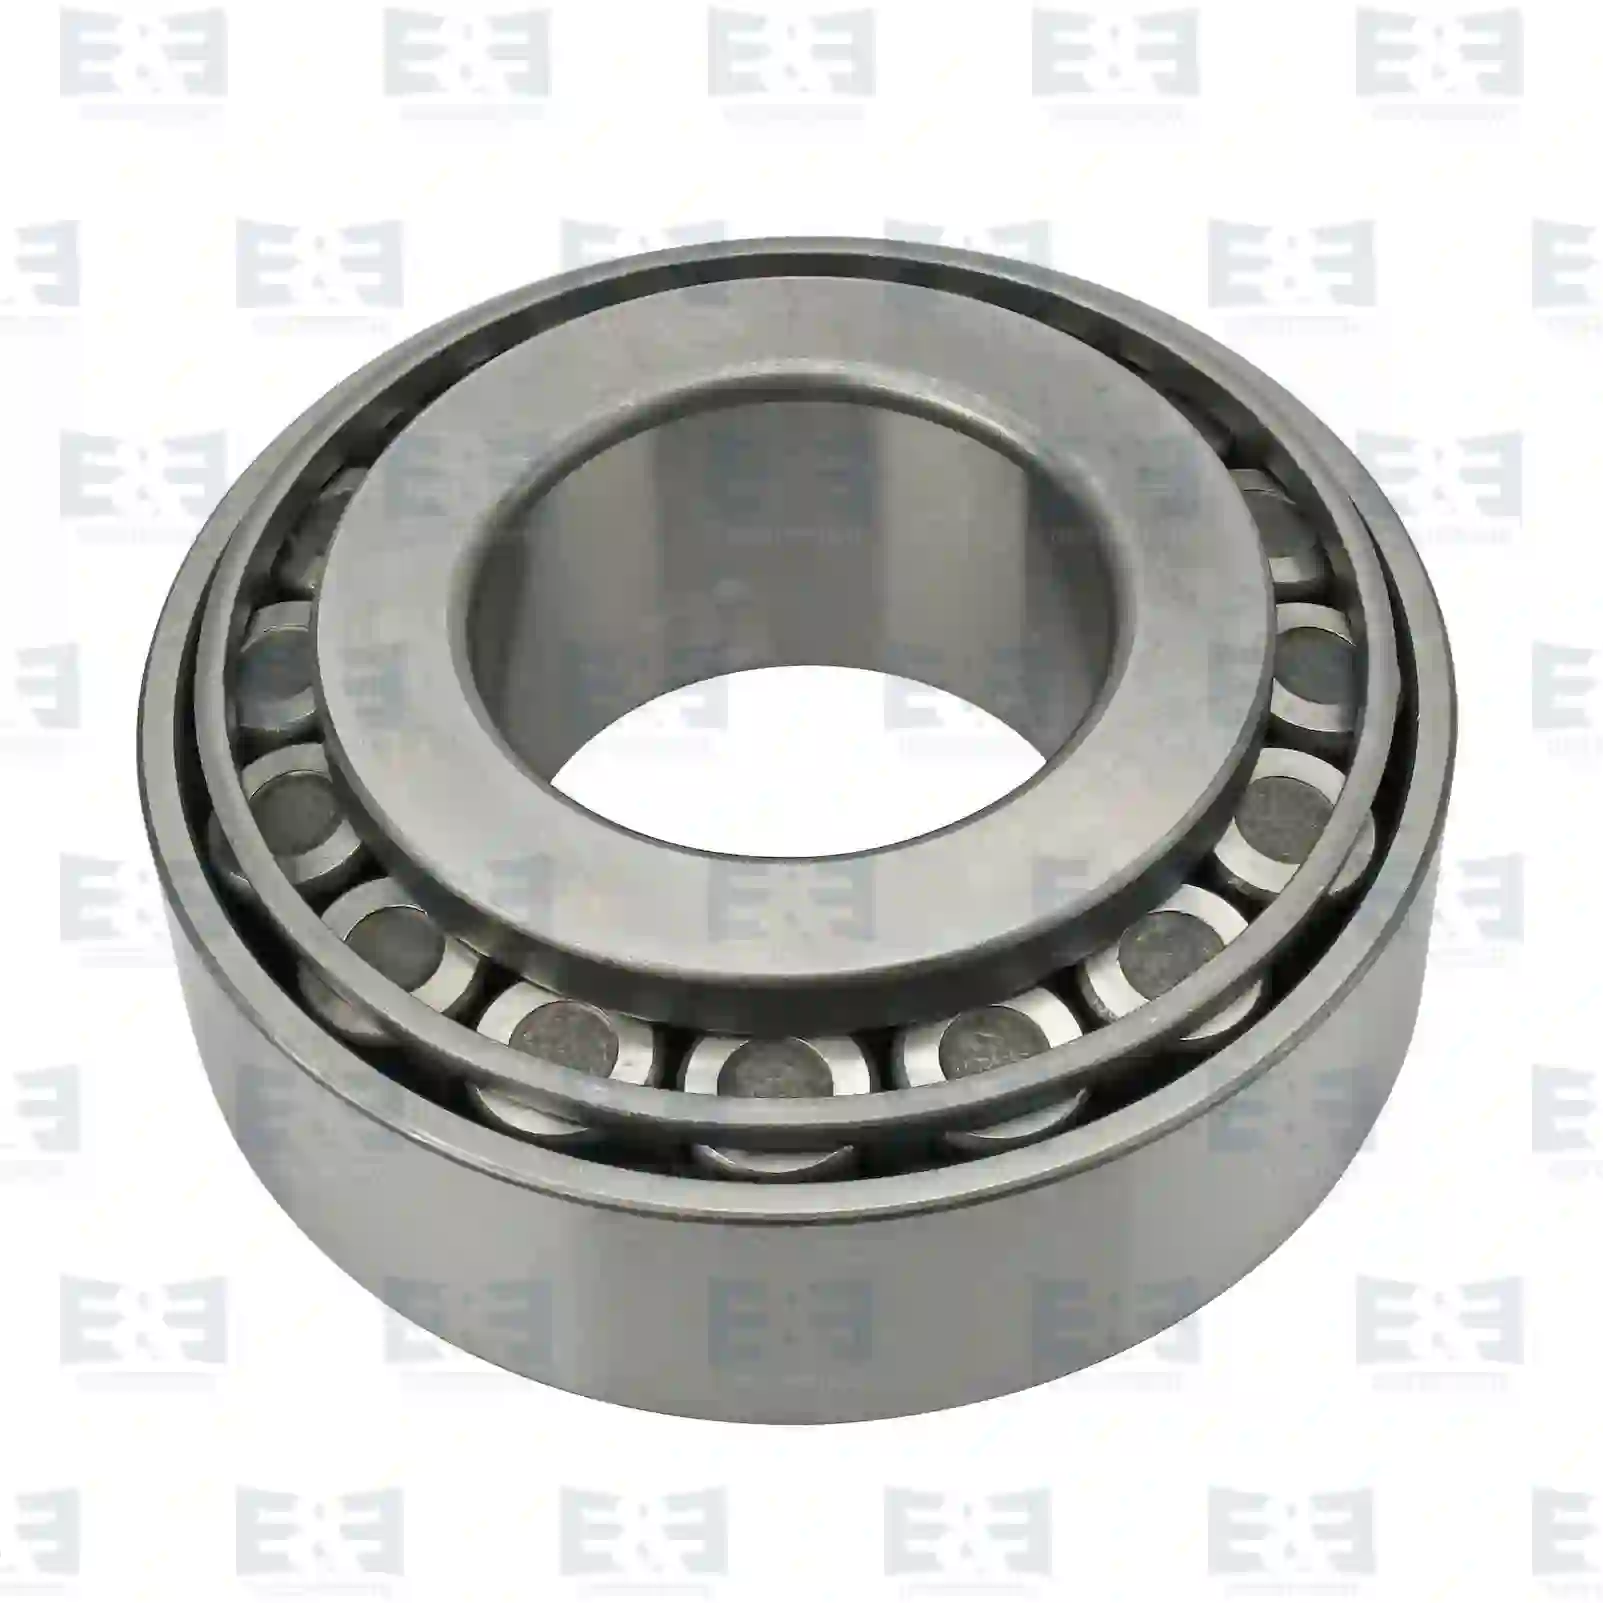 Balance Arm, Trunnion Tapered roller bearing, EE No 2E2279664 ,  oem no:4200003500, 123629, E&E Truck Spare Parts | Truck Spare Parts, Auotomotive Spare Parts